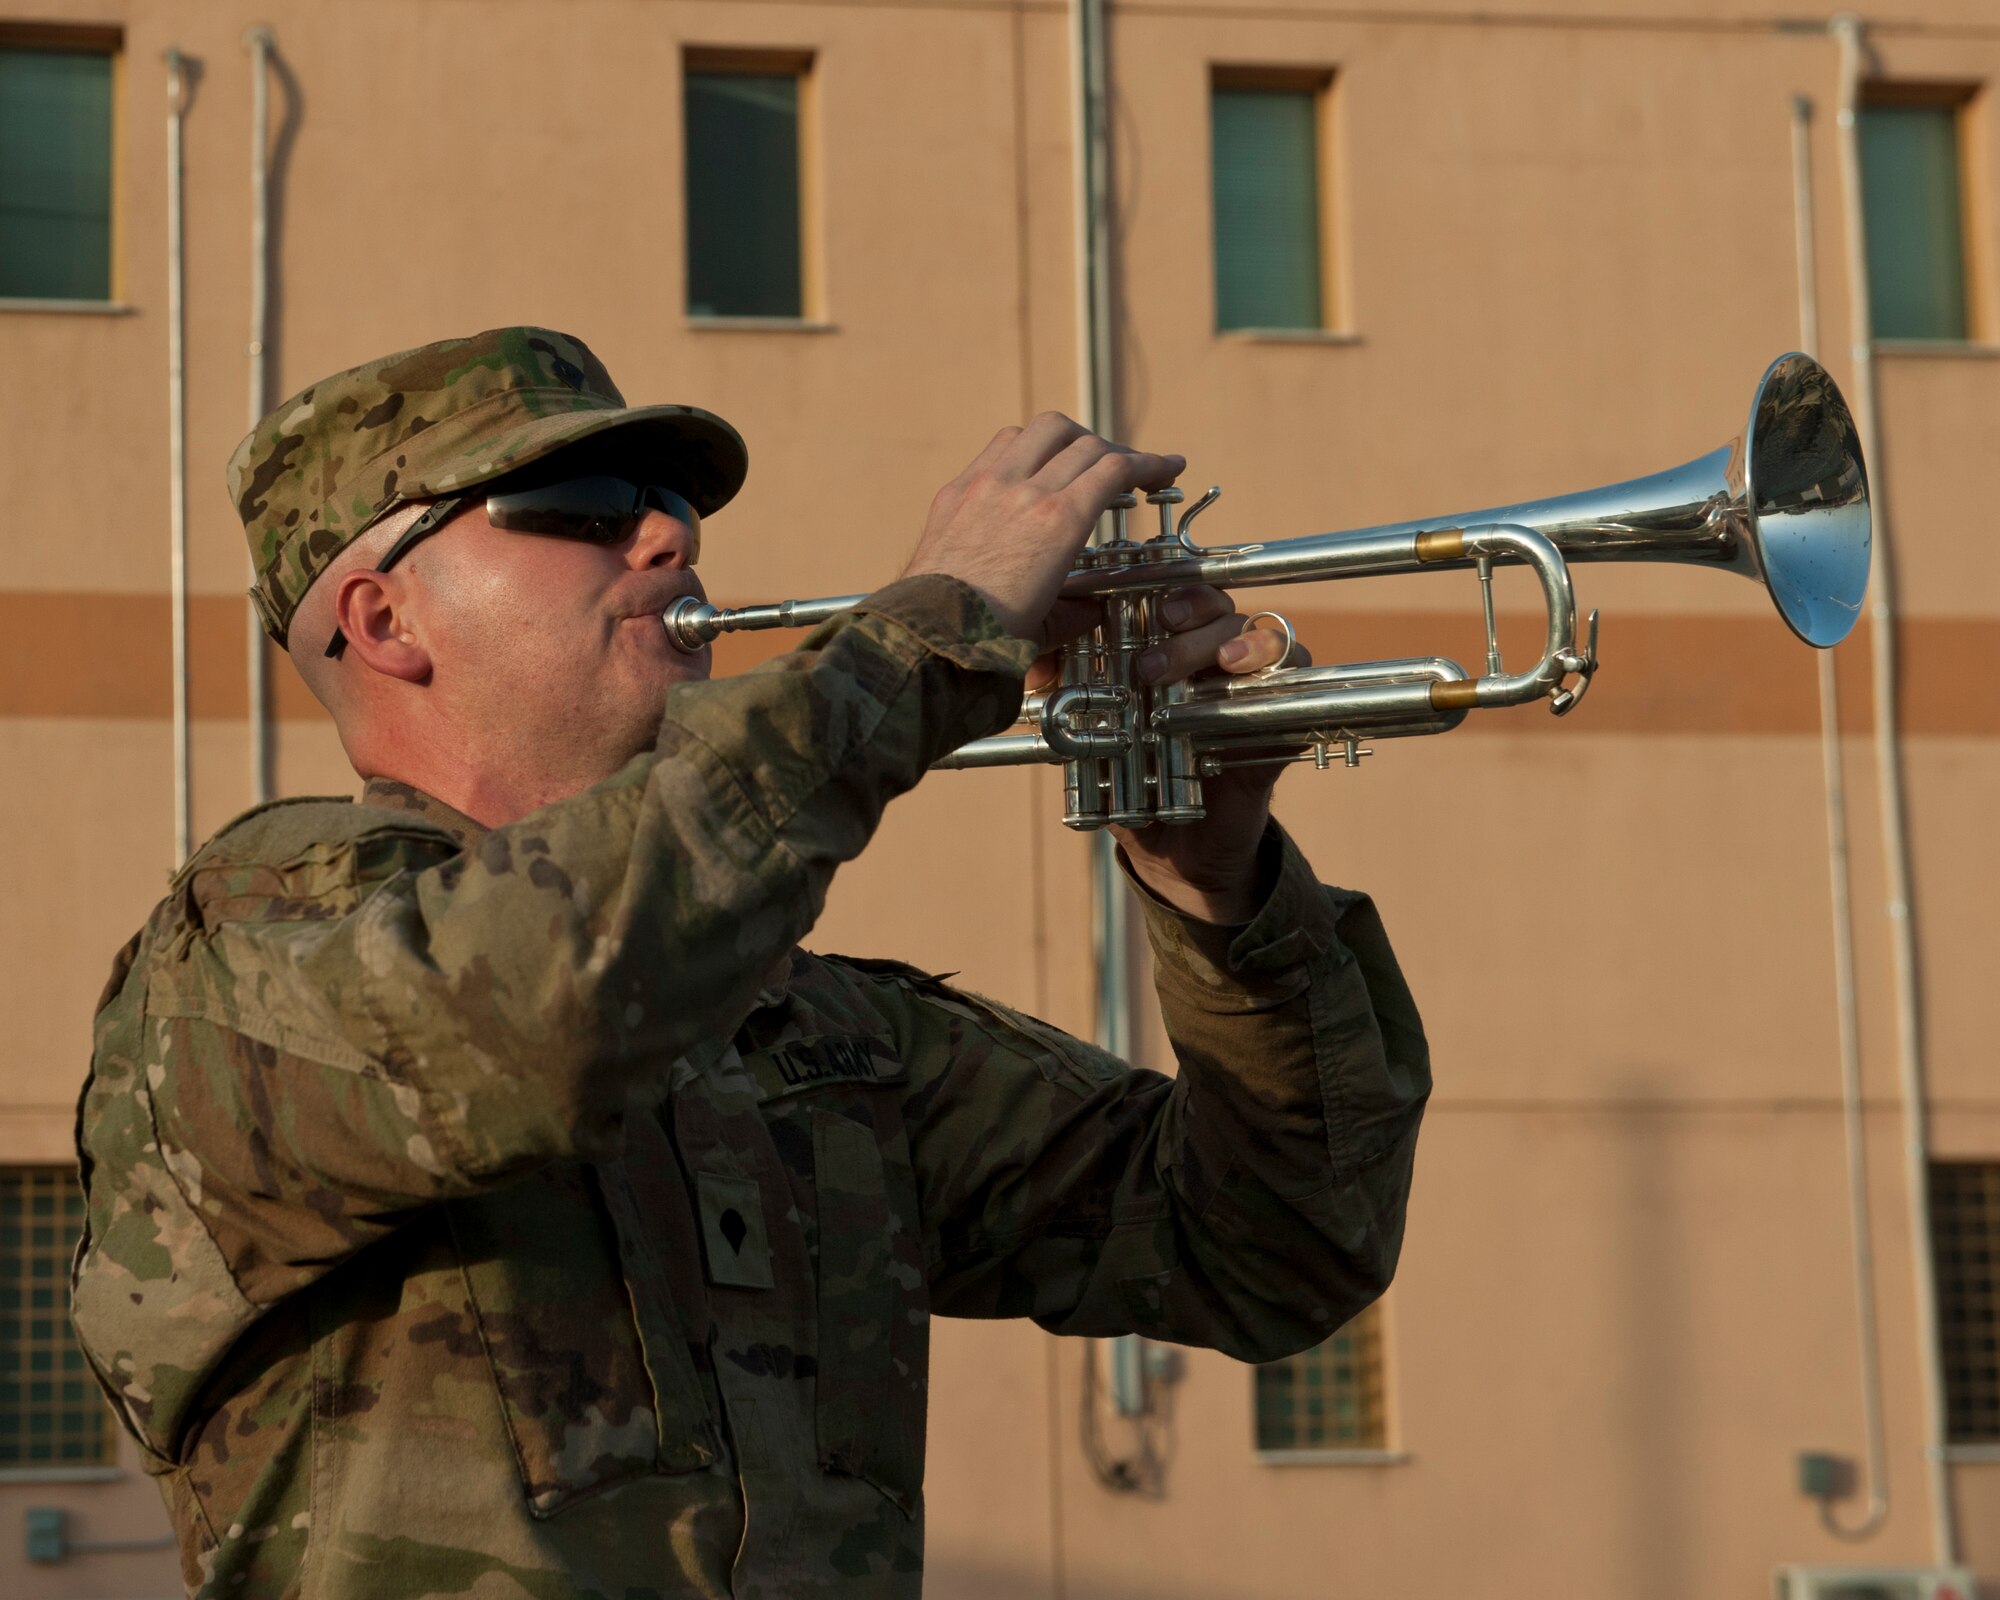 U.S. Army Specialist David Burrell, U.S. Forces Afghanistan Band musician, plays taps during a 9/11 remembrance ceremony, Bagram Airfield, Afghanistan, Sept. 11, 2016. The ceremony brought together servicemembers and civilians from across Bagram to remember those who lost their lives 15 years go. (U.S. Air Force photo by Capt. Korey Fratini)